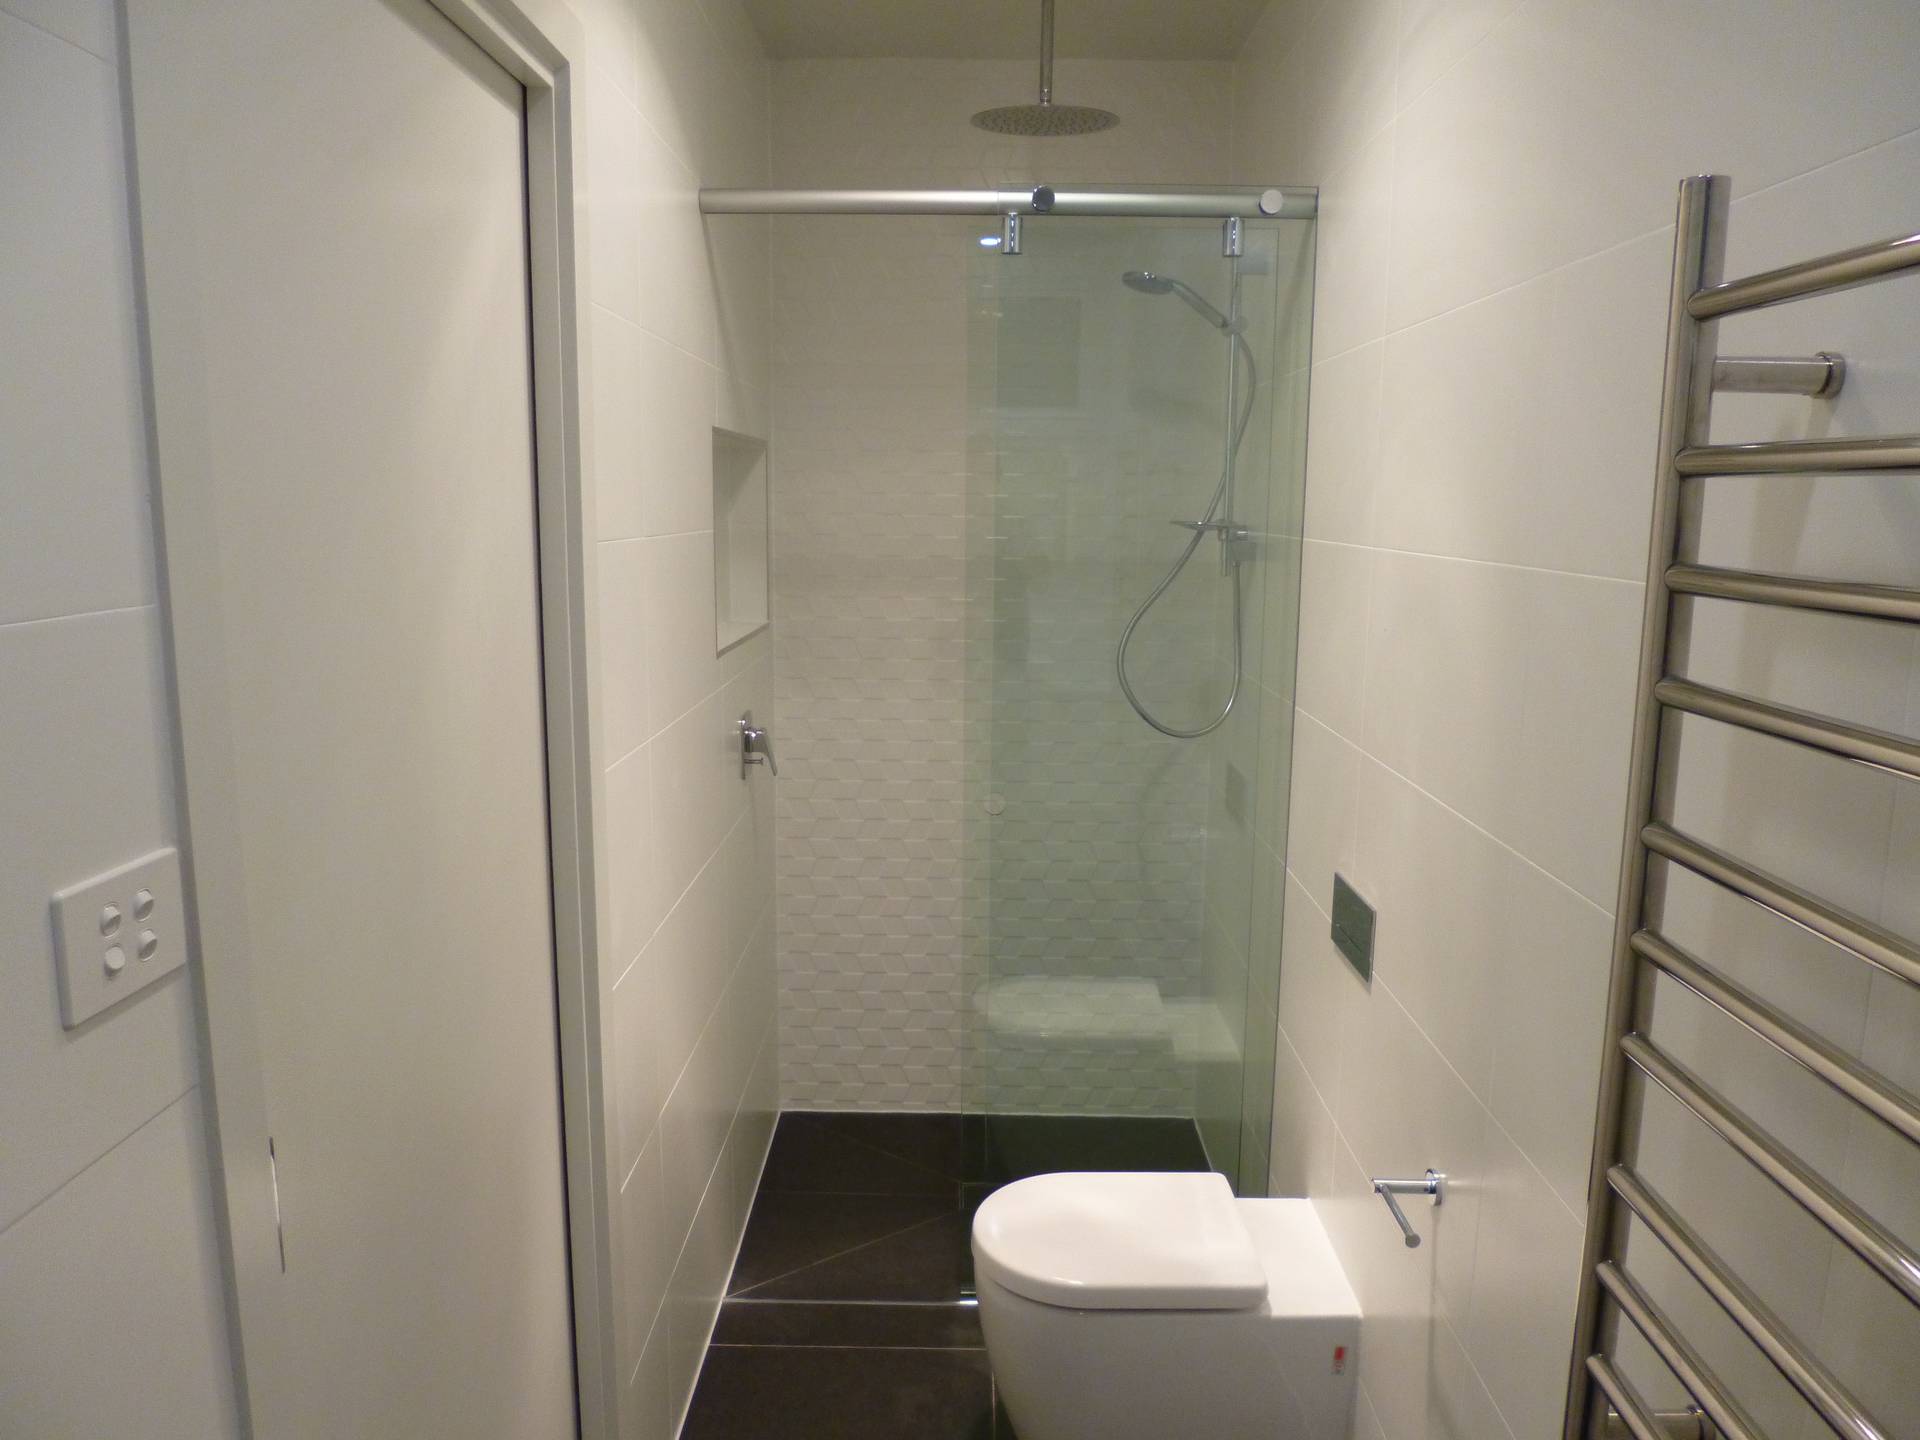 Completion of the home extension with plumbing fittings and sliding door frameless glass shower screen installed.